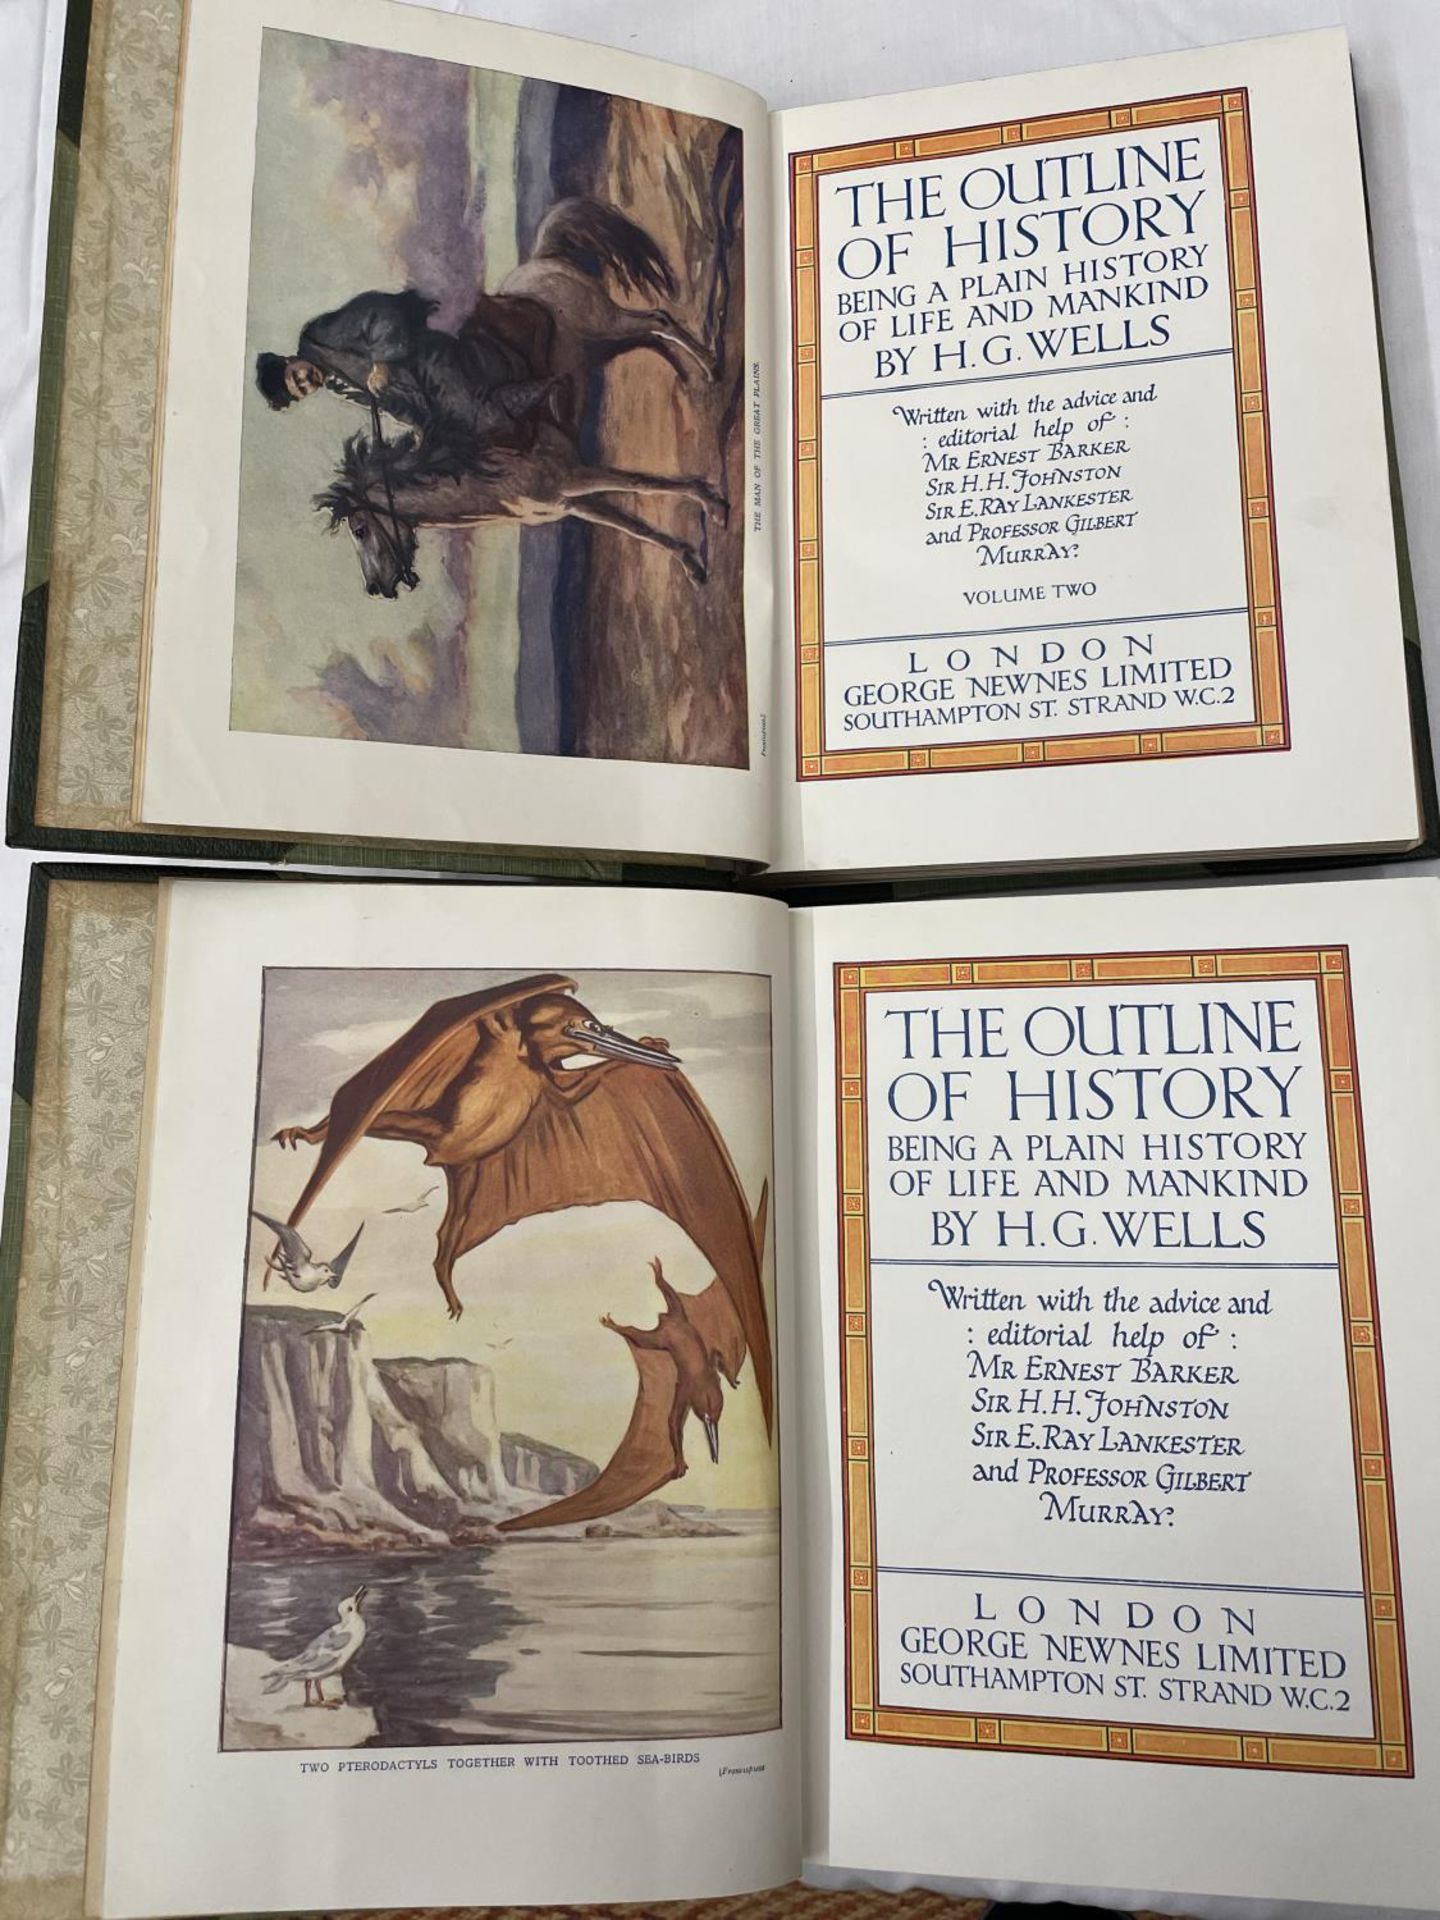 FIRST EDITION THE OUTLINE OF HISTORY VOL 1 AND 2 BY H G WELLS - Image 2 of 2